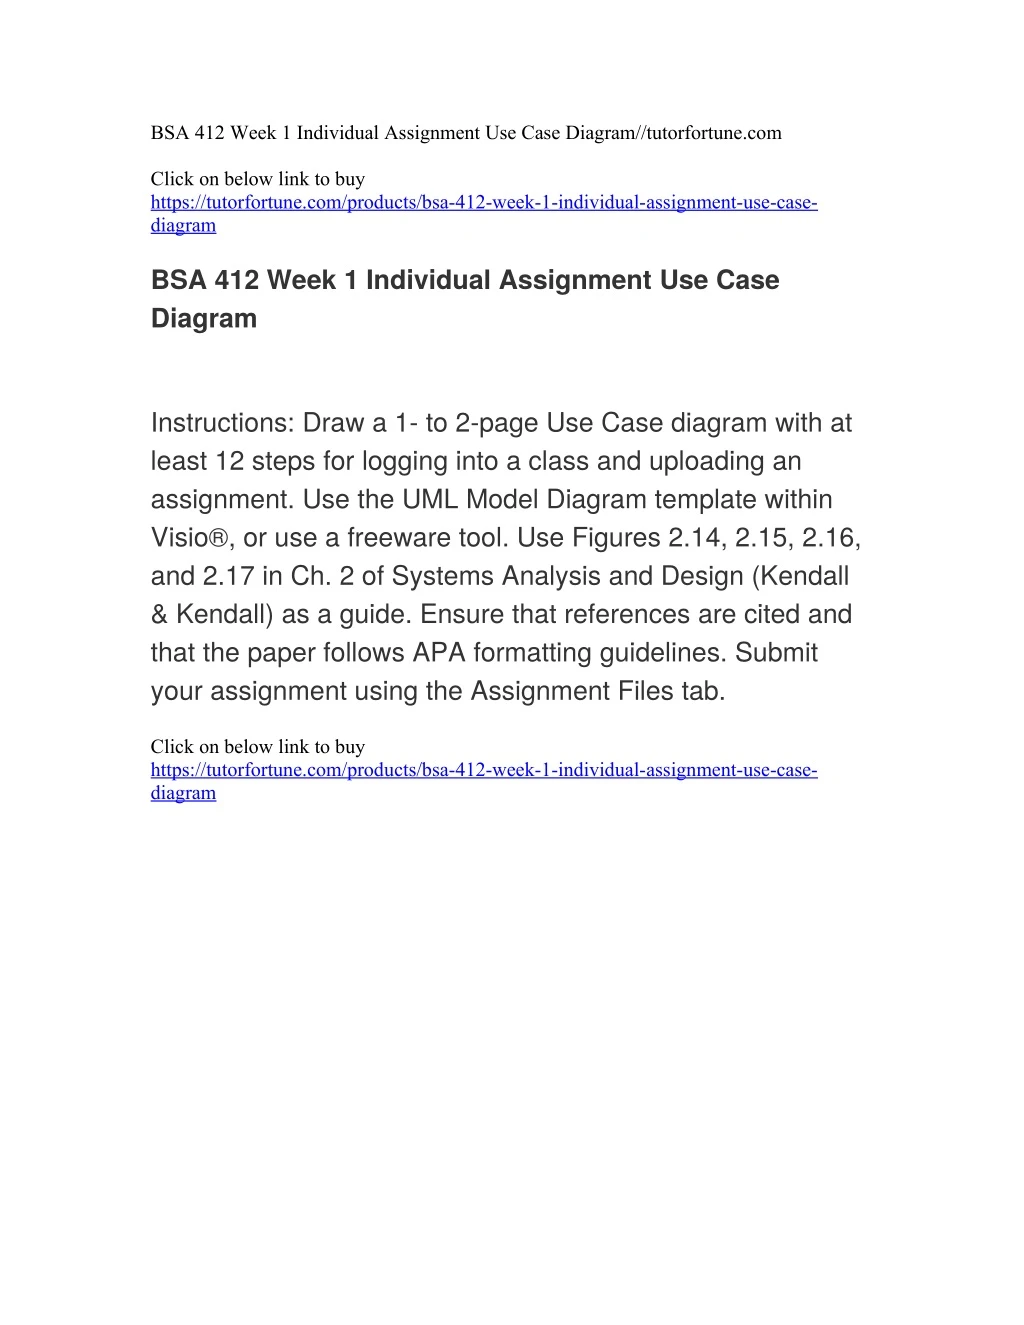 bsa 412 week 1 individual assignment use case